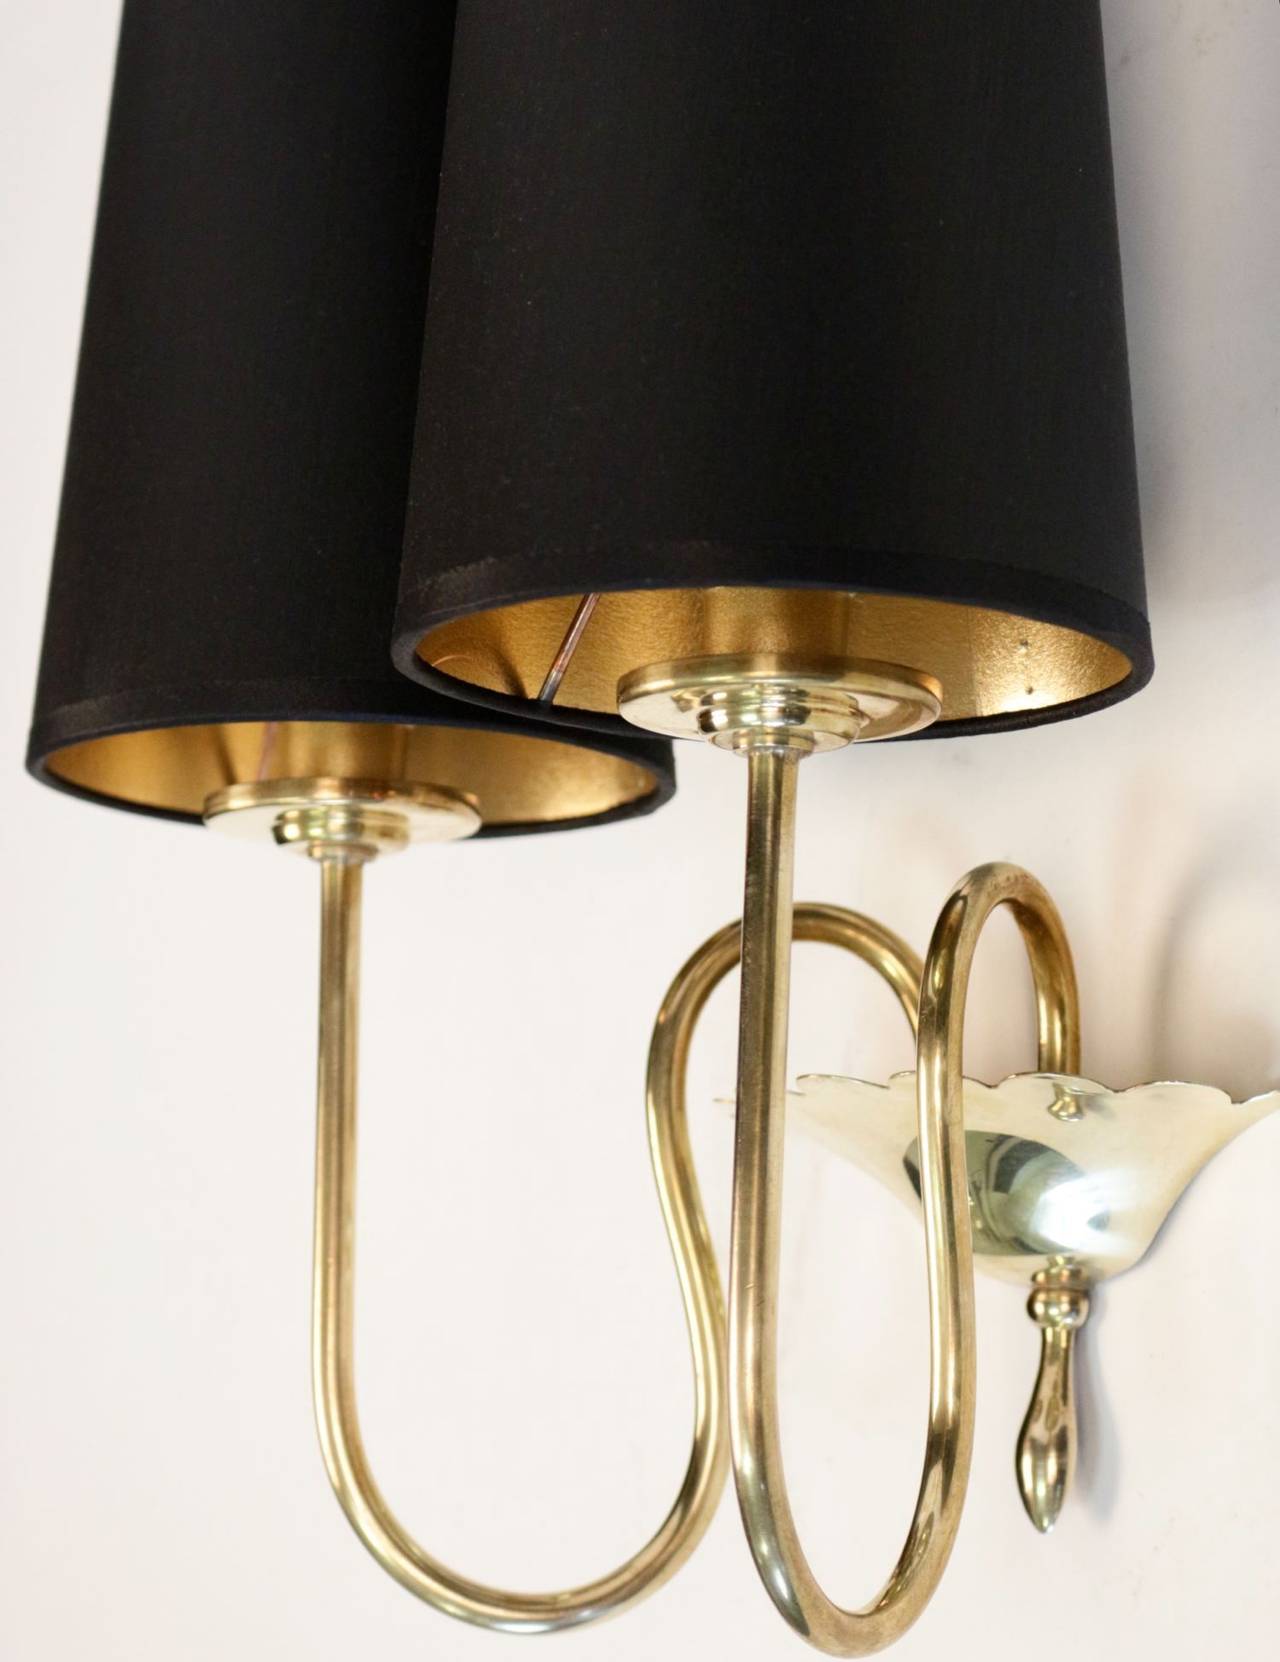 Pair of 1950s neoclassical sconces by Maison Arlus.
Serrated cup brass emphasized by two voluted rods serving as lighted arms. Lampshade made to measure, gold interior, black exterior. Two light arm per sconce.